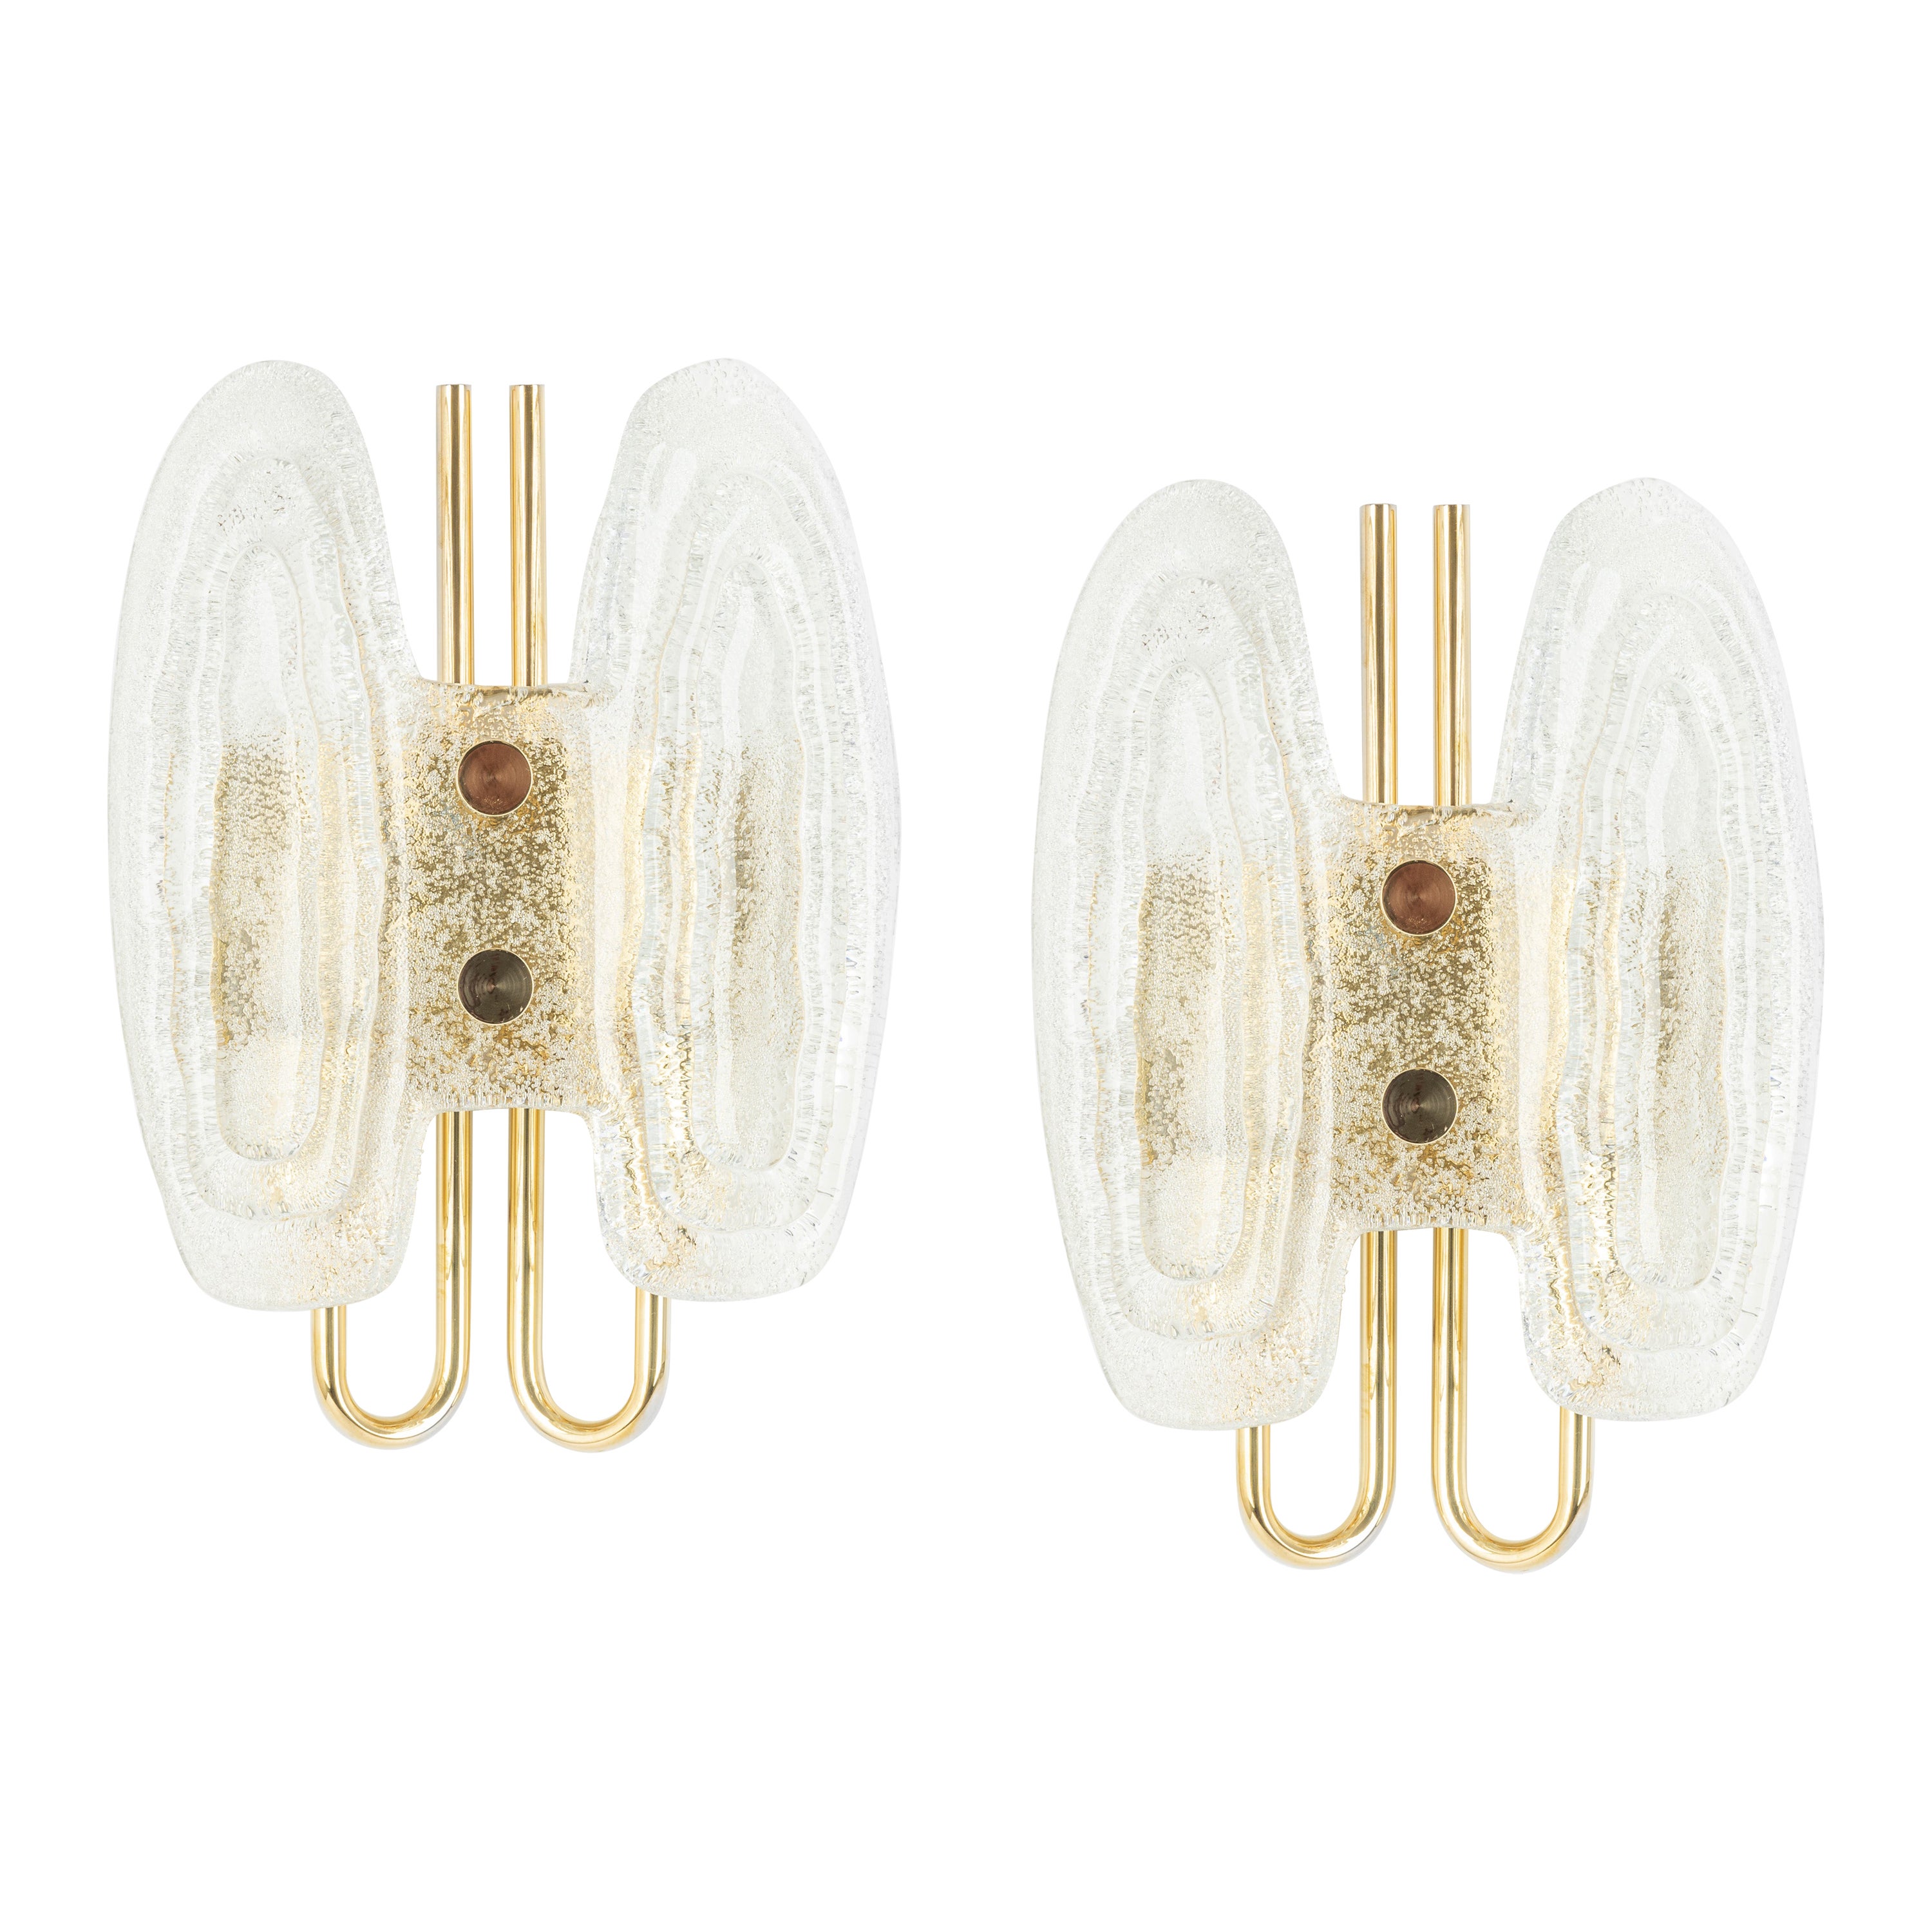 Pair of Murano Ice Glass Brass Sconces by Hillebrand, Germany, 1970s